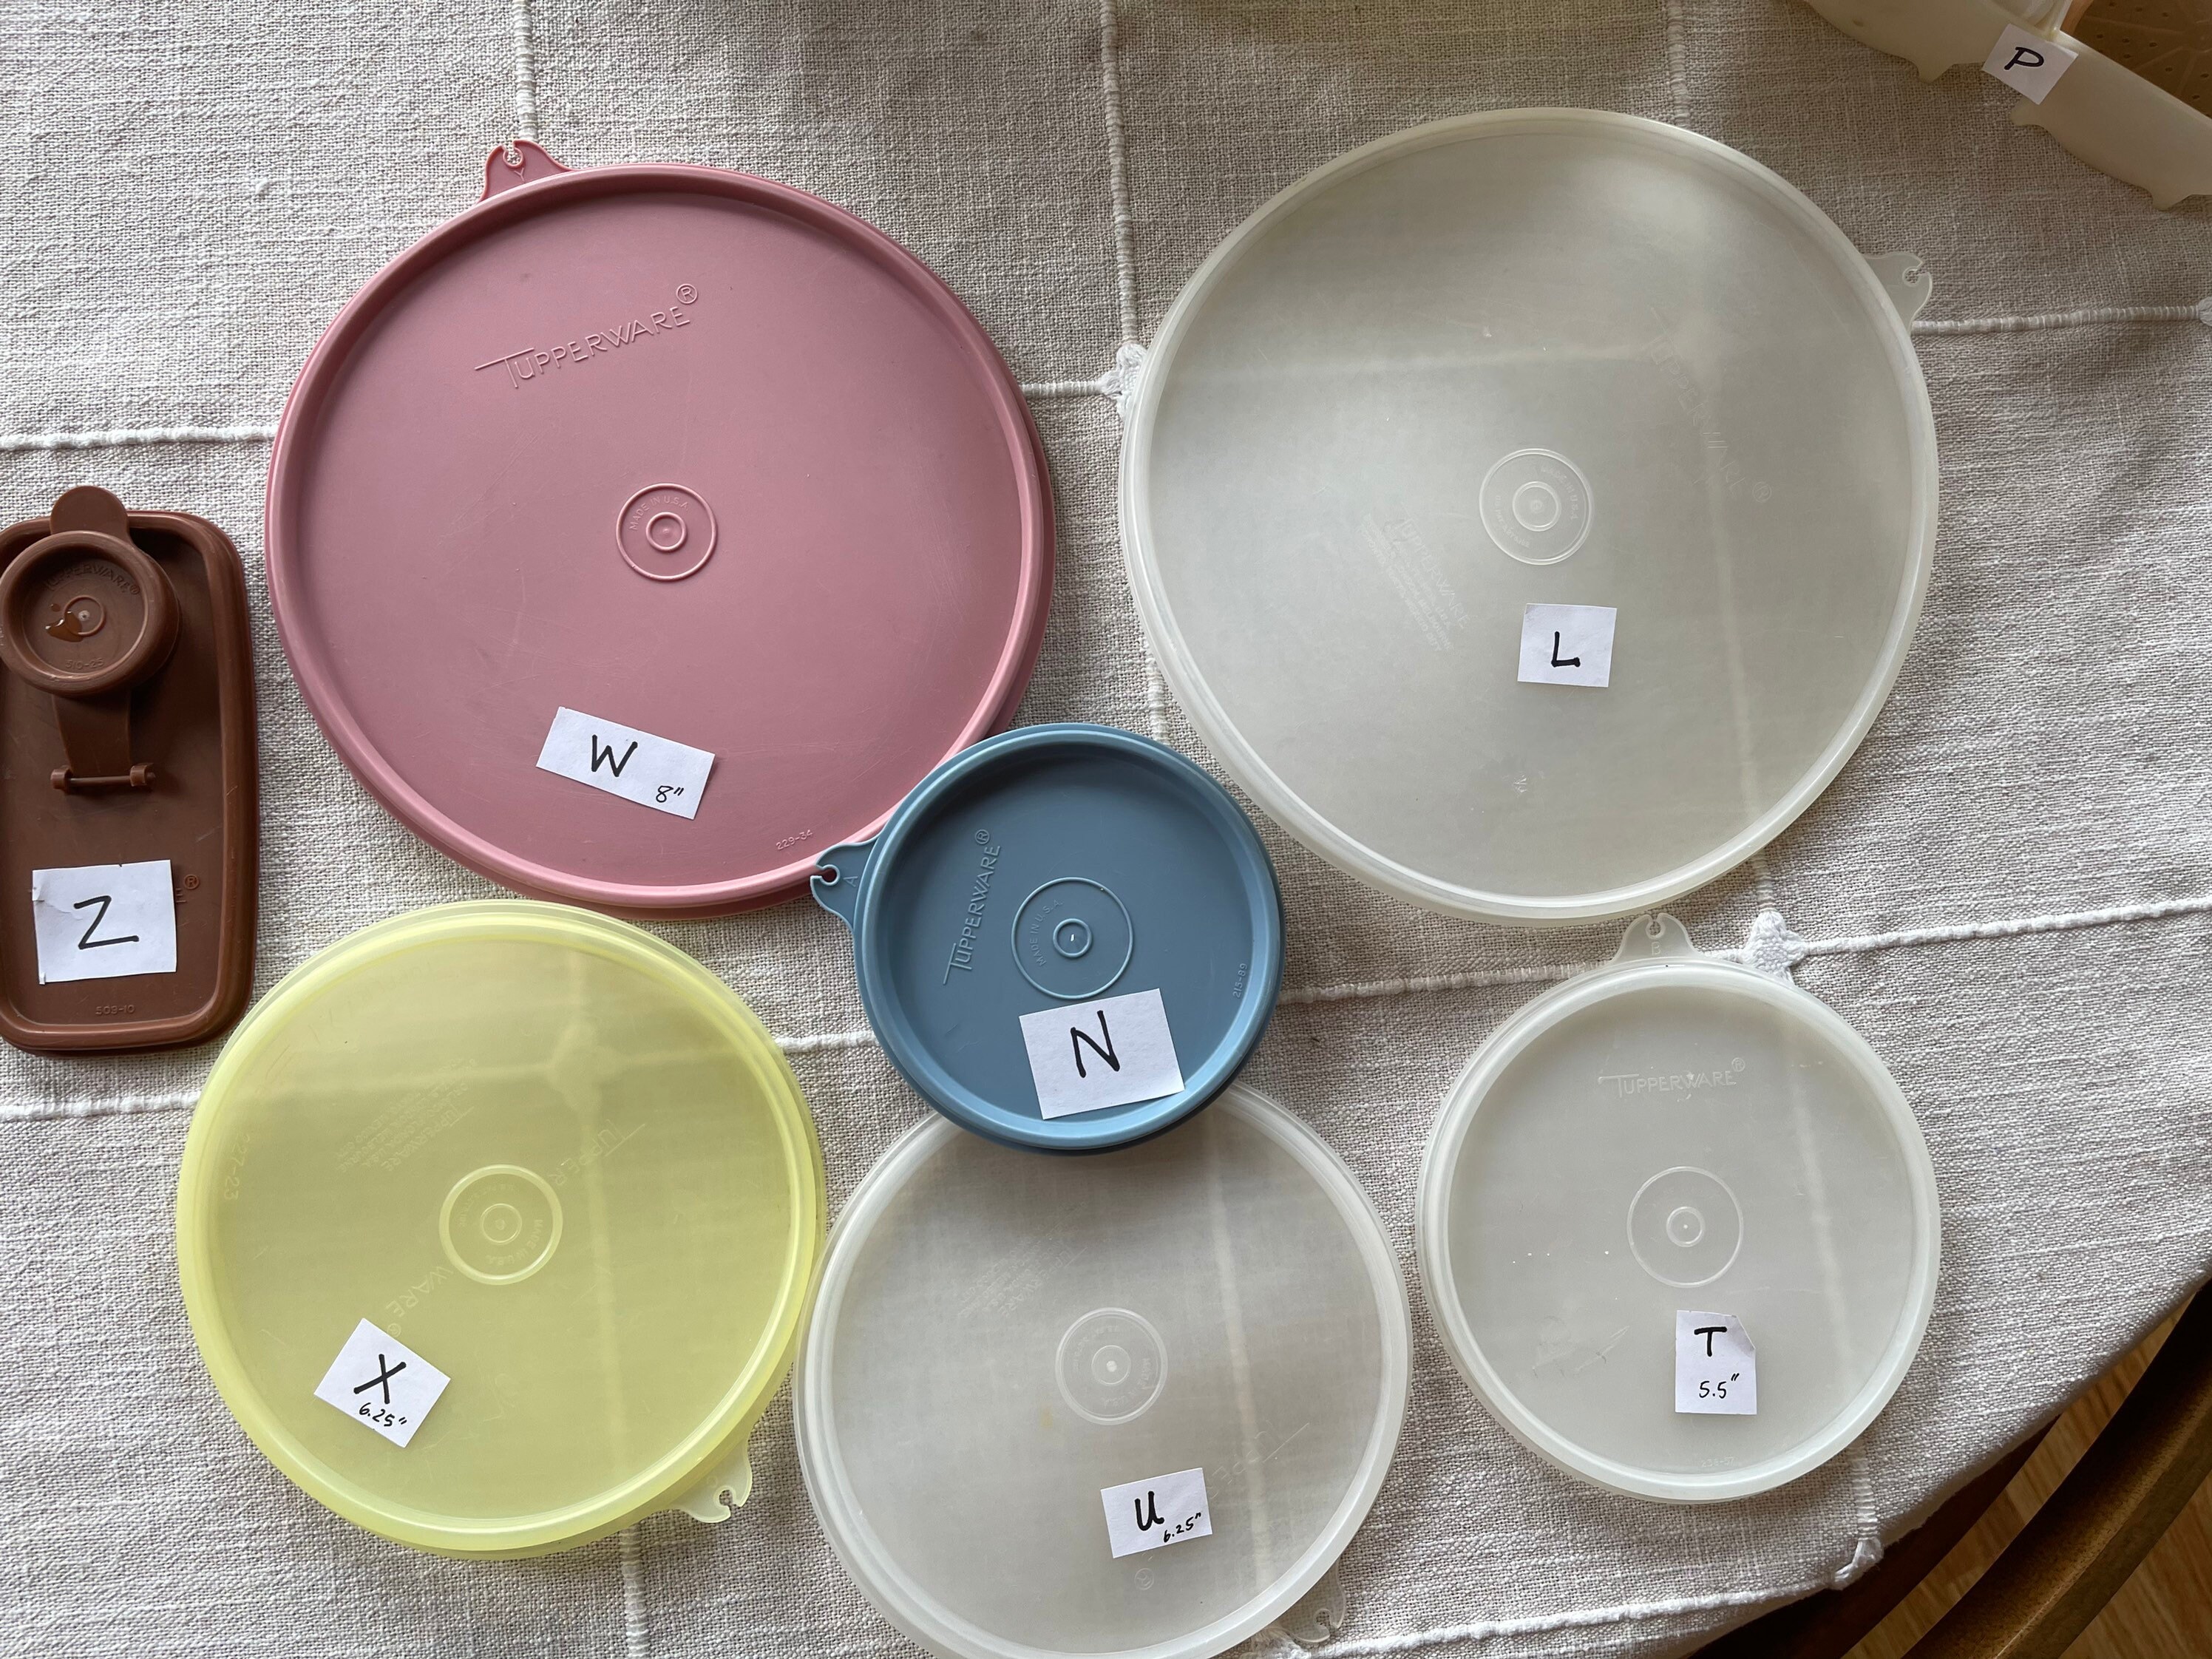 Vintage Accordion Tupperware Lids Replacements Servalier Etc YOU PICK Added  Colors and Stock Mid Century Kitchen Storage Container 